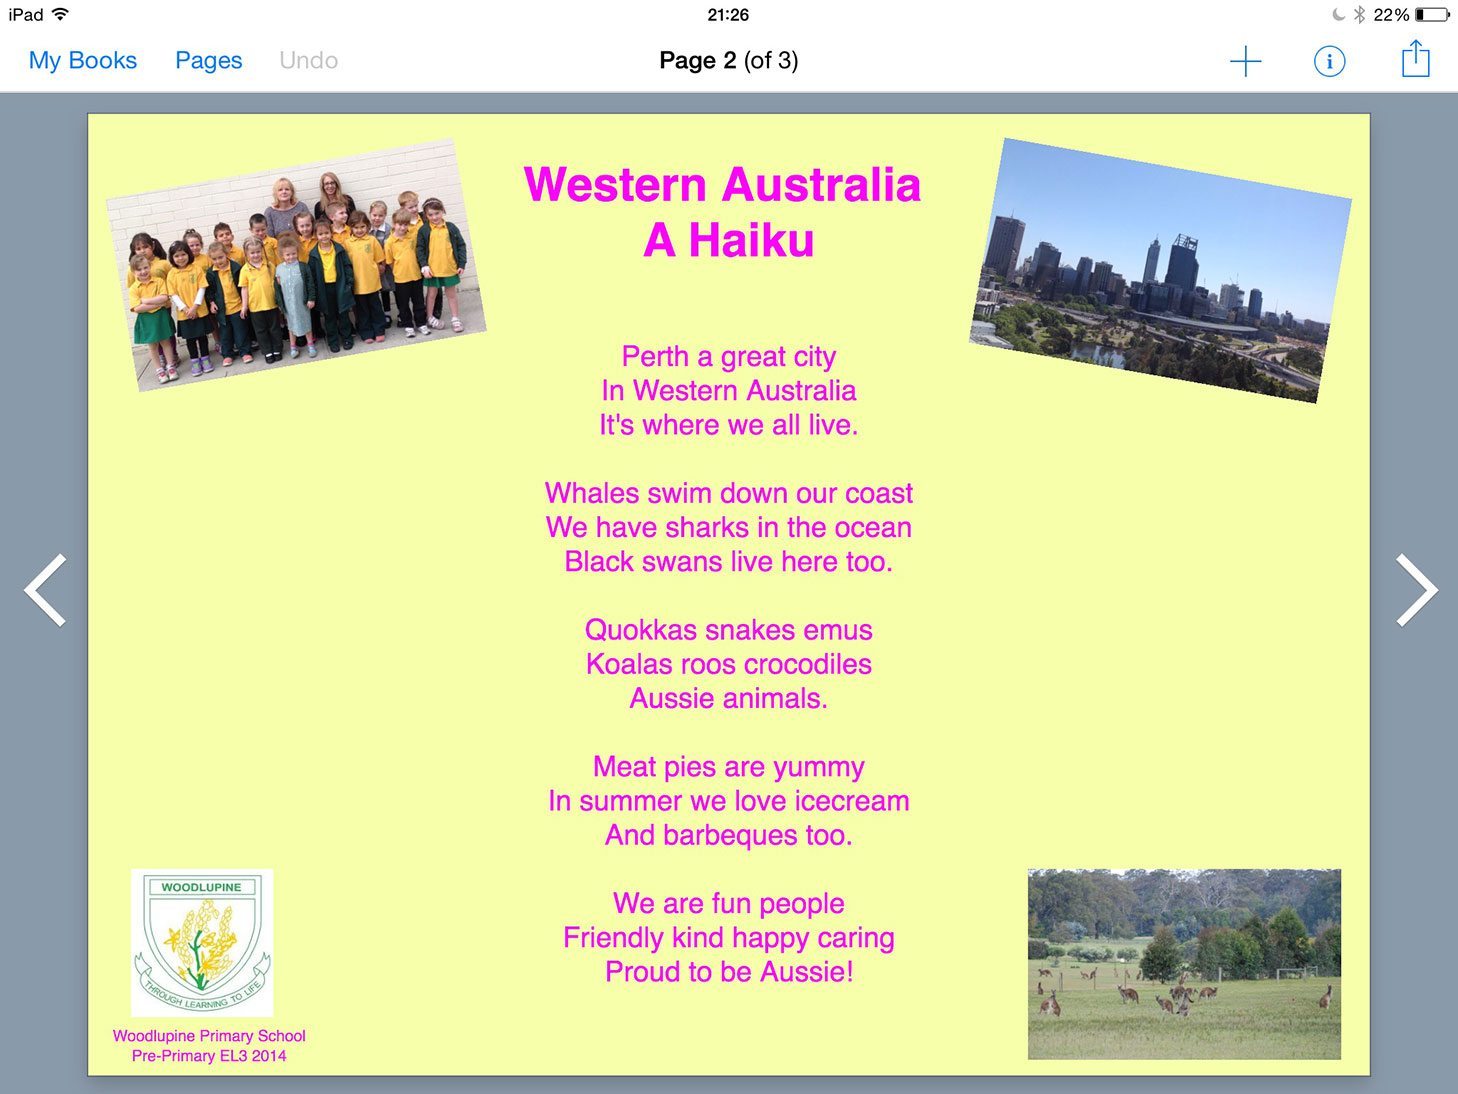 Page created by Linda Chapman's class